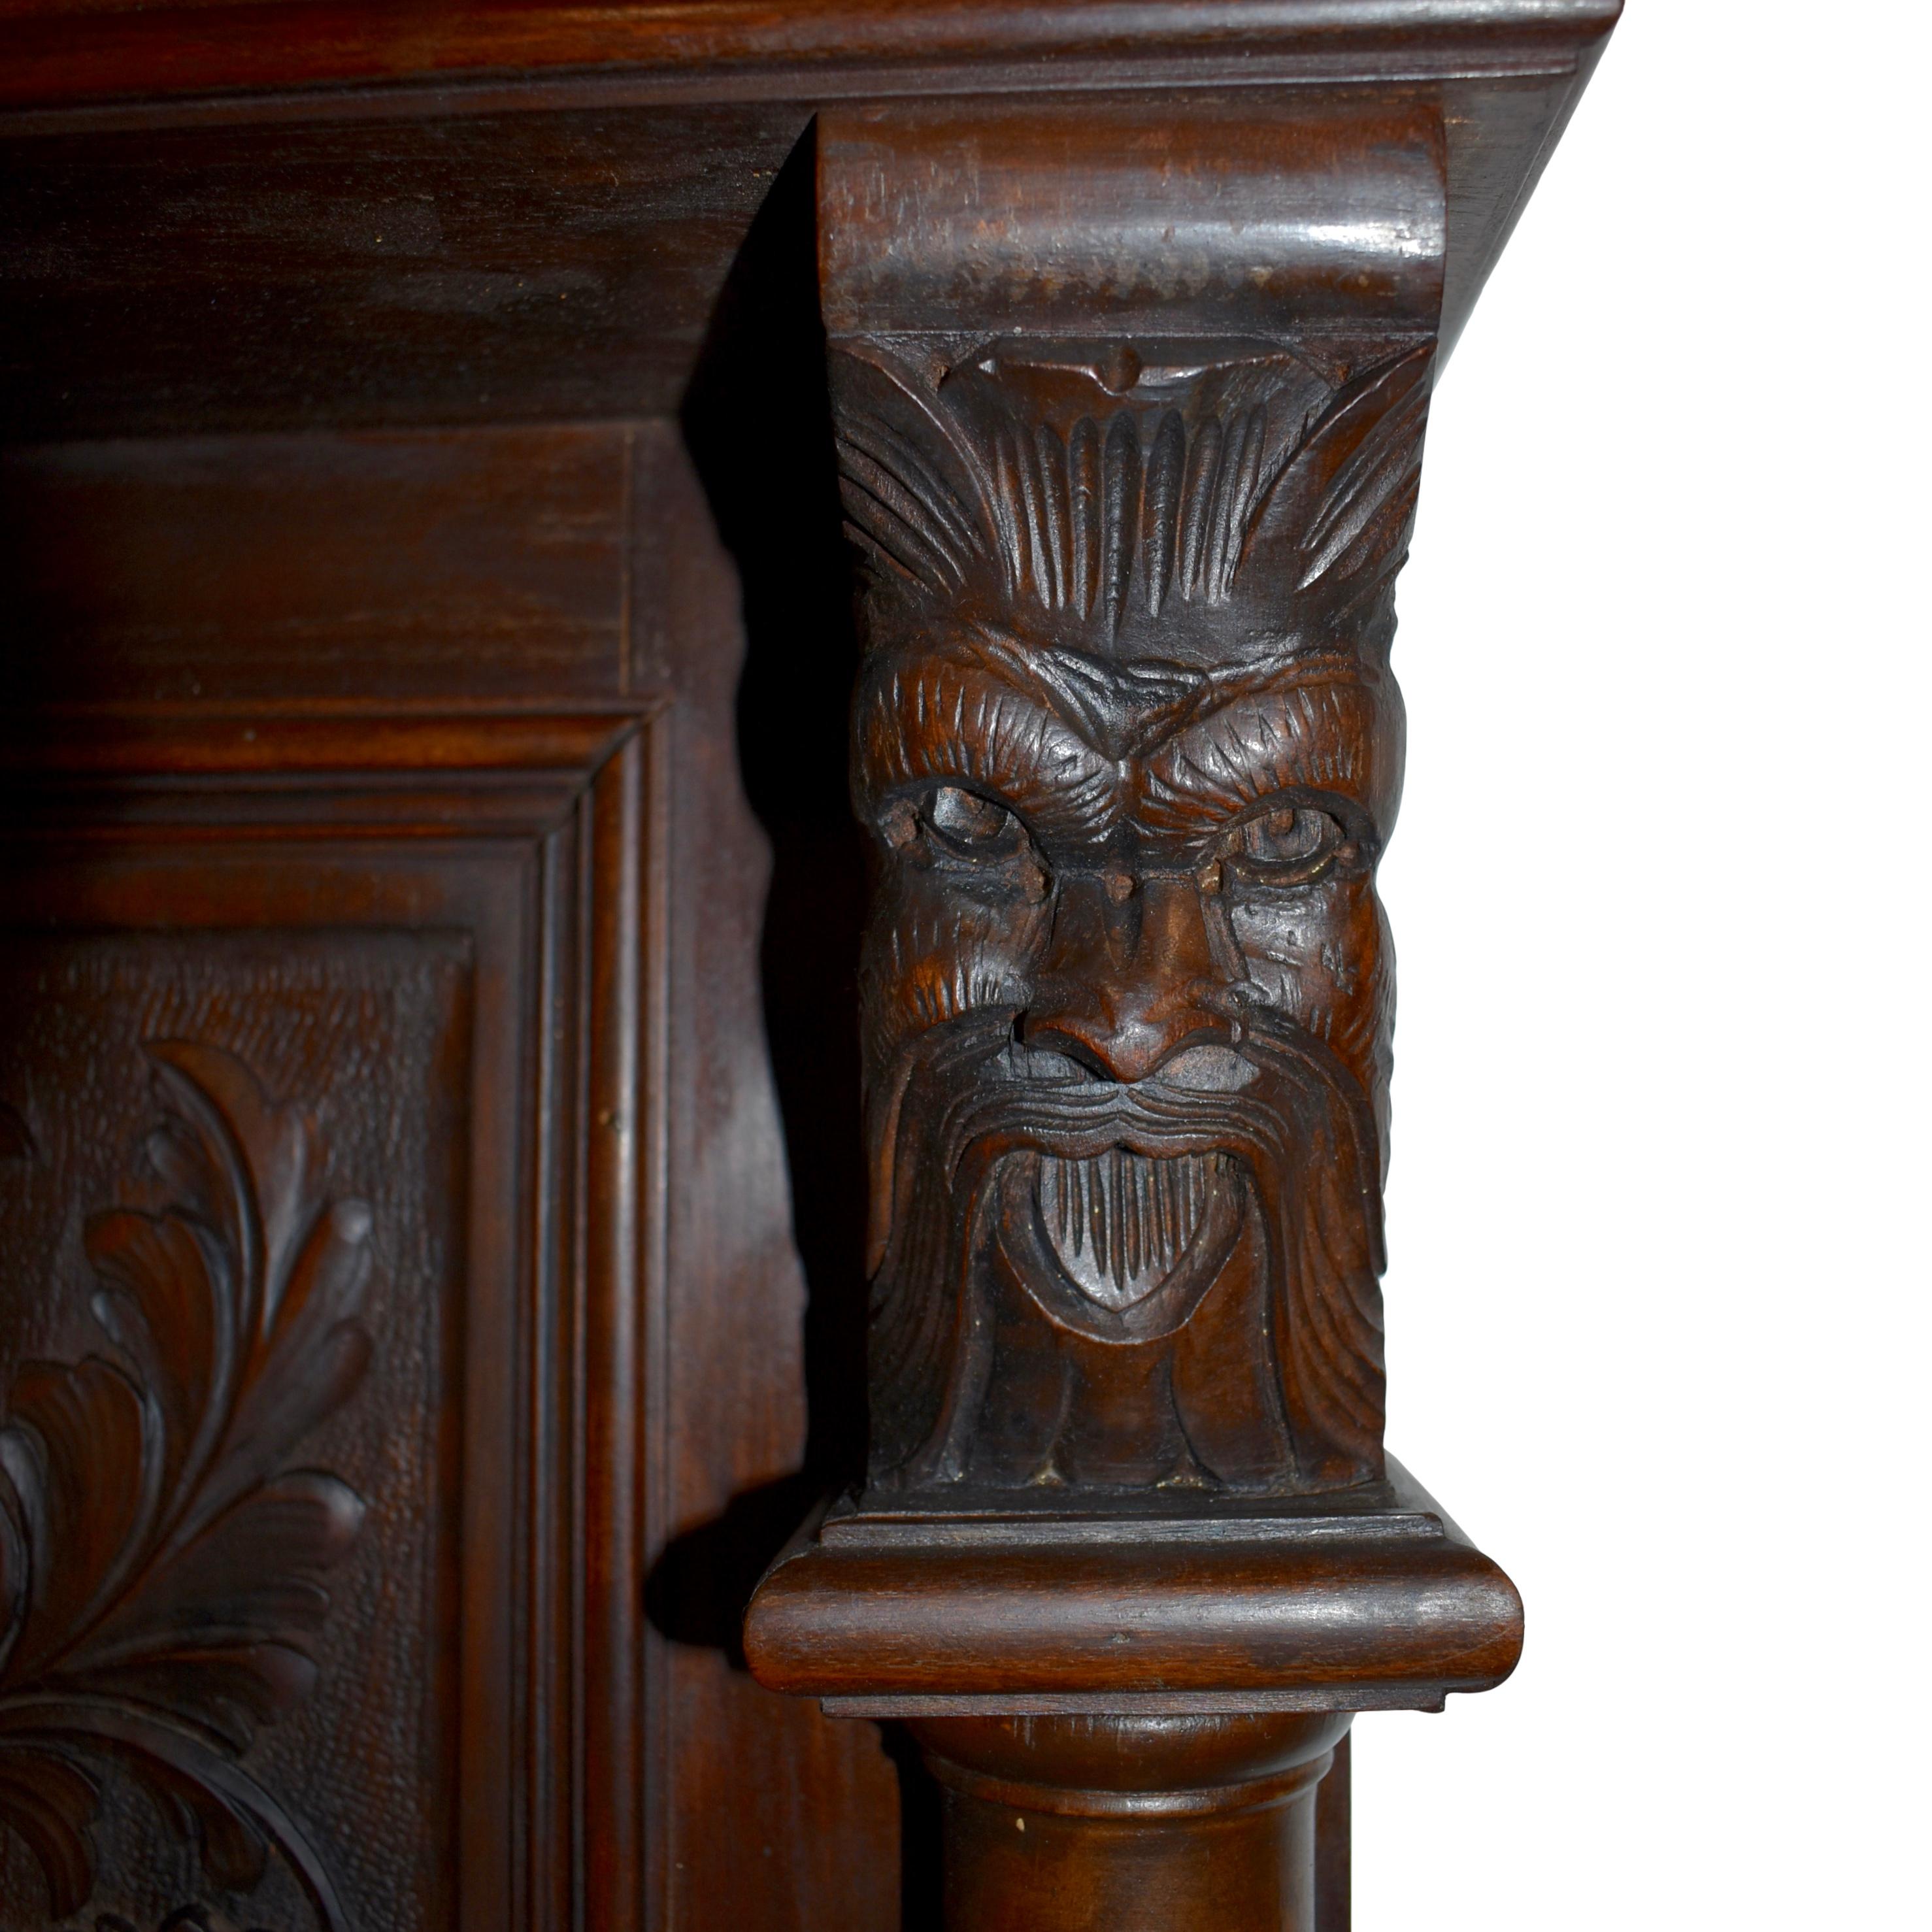 Carved Italian Renaissance Revival Walnut Hall Bench with Green Man Motif, circa 1900 For Sale